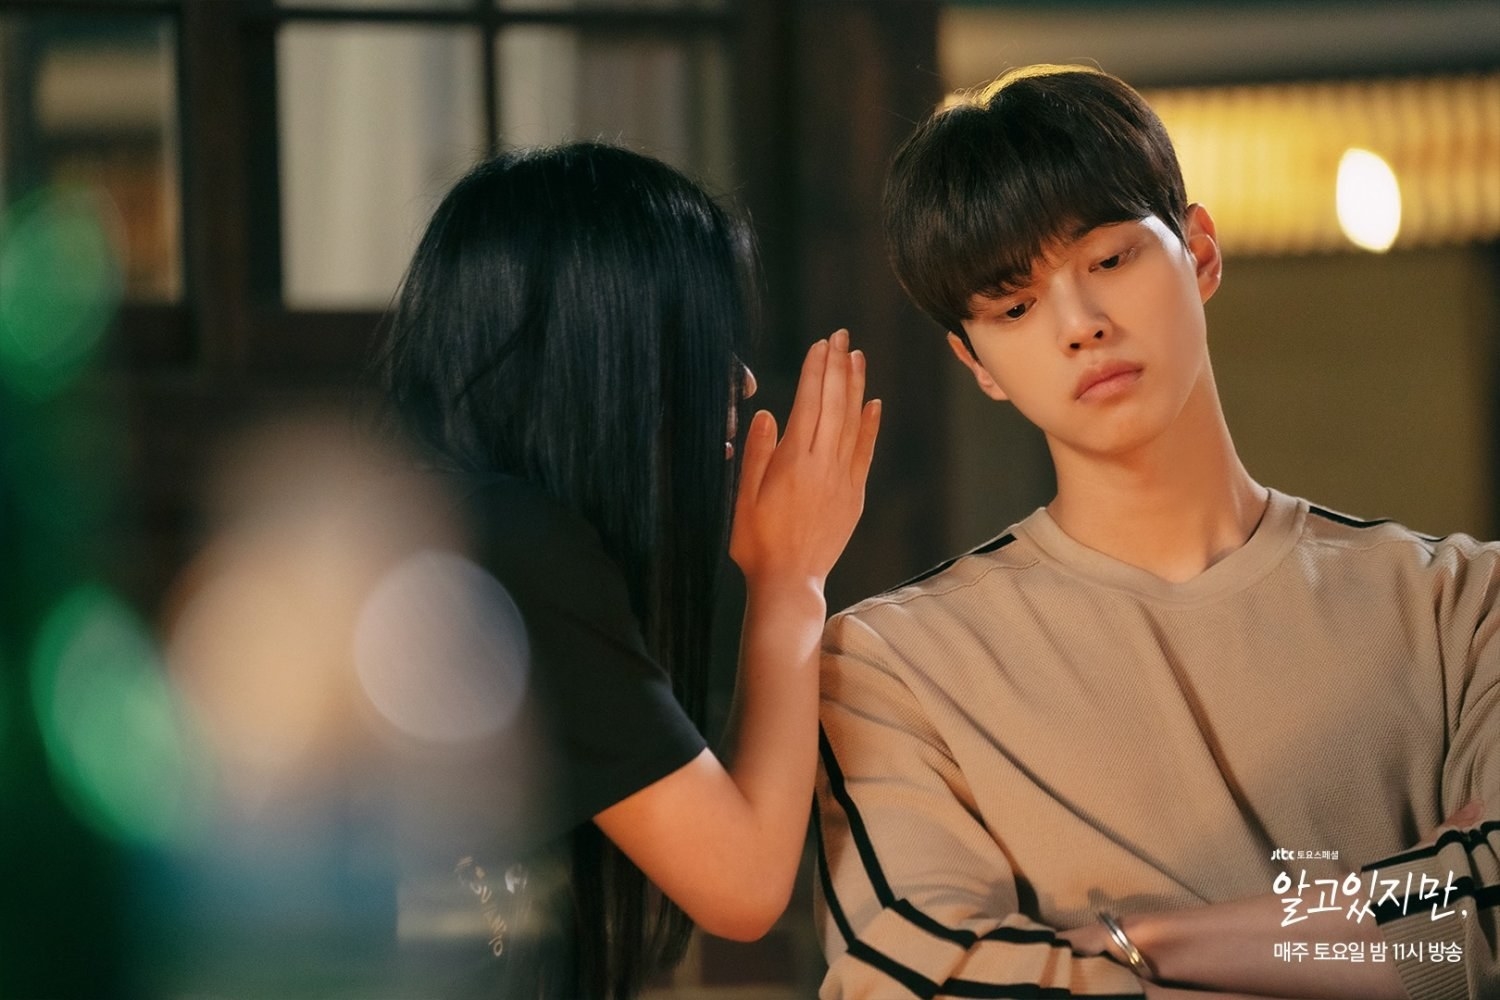 Do-hyeok&#x27;s cousin has hand up, whispering to Jae-eon as he looks away and leans toward her